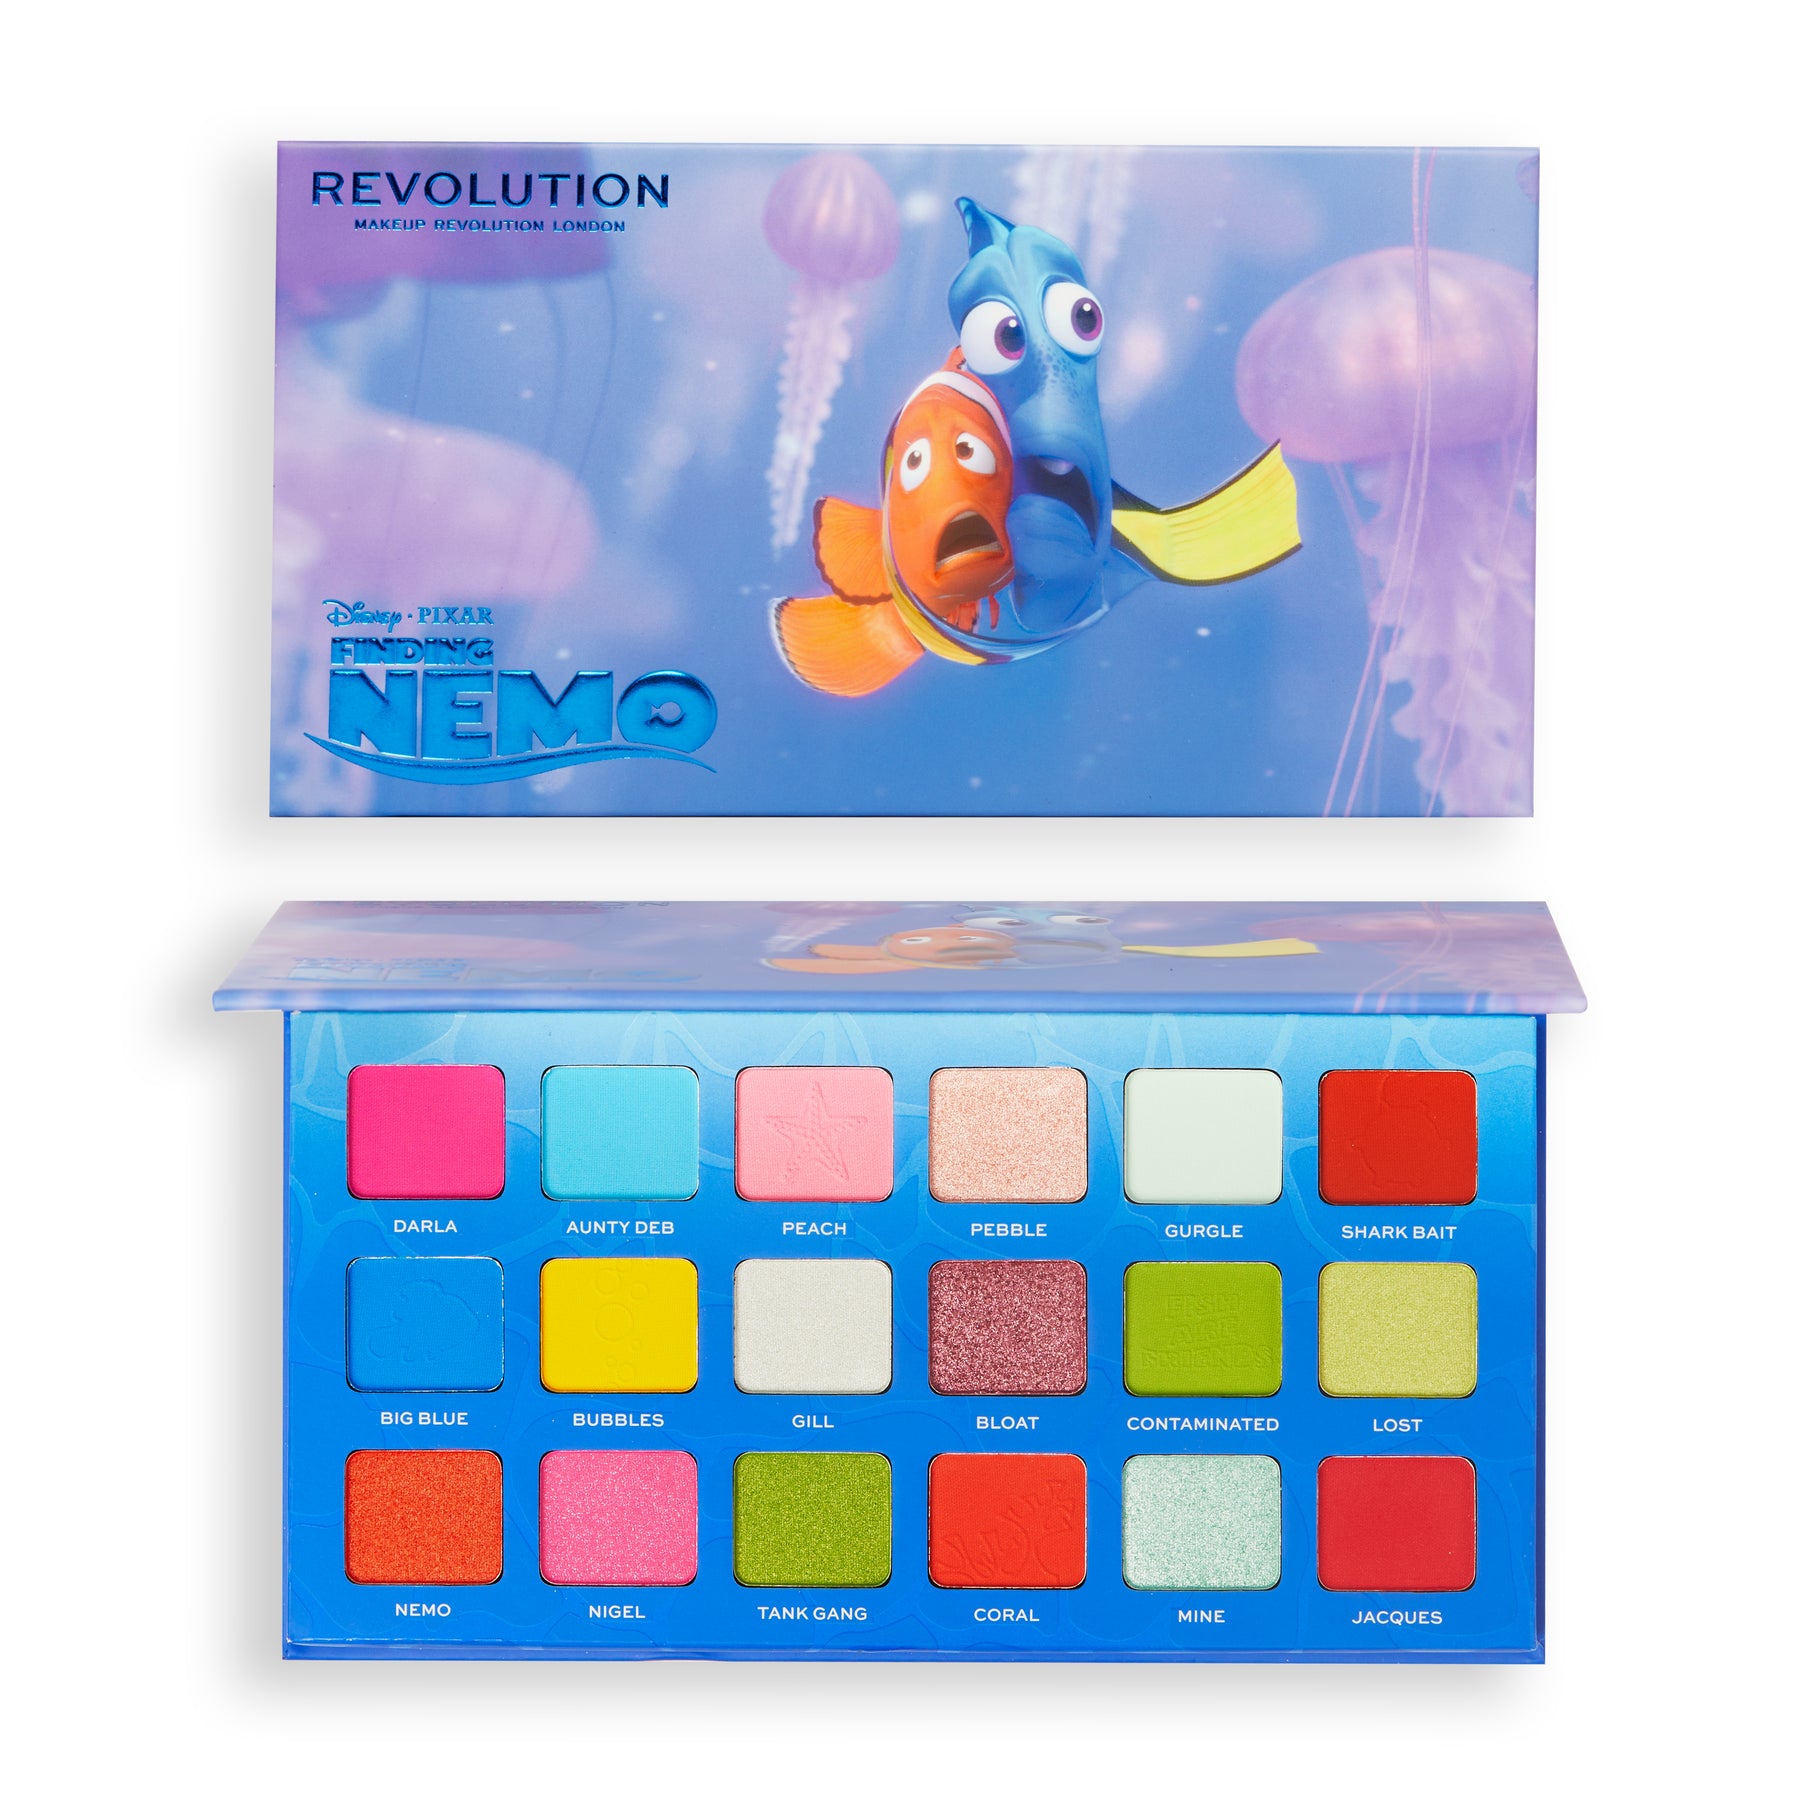 Disney & Pixar’s Finding Nemo and Revolution Finding Nemo-inspired Shadow Palette OUTLET